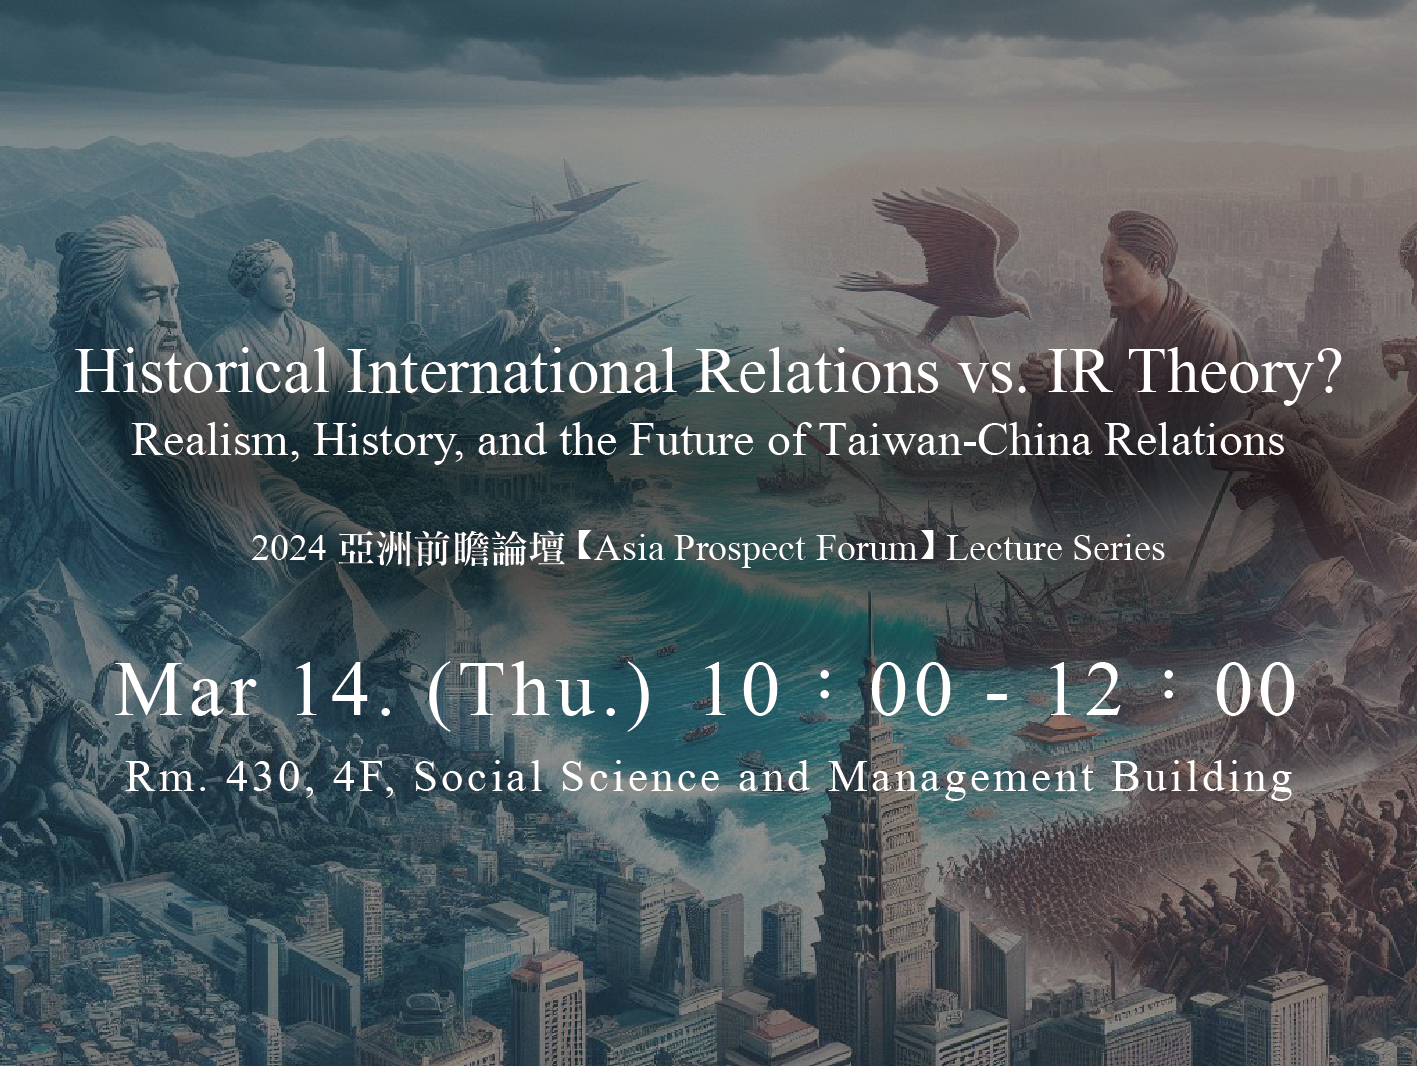 Historical International Relations vs. IR Theory? Realism, History, and the Future of Taiwan-China Relations